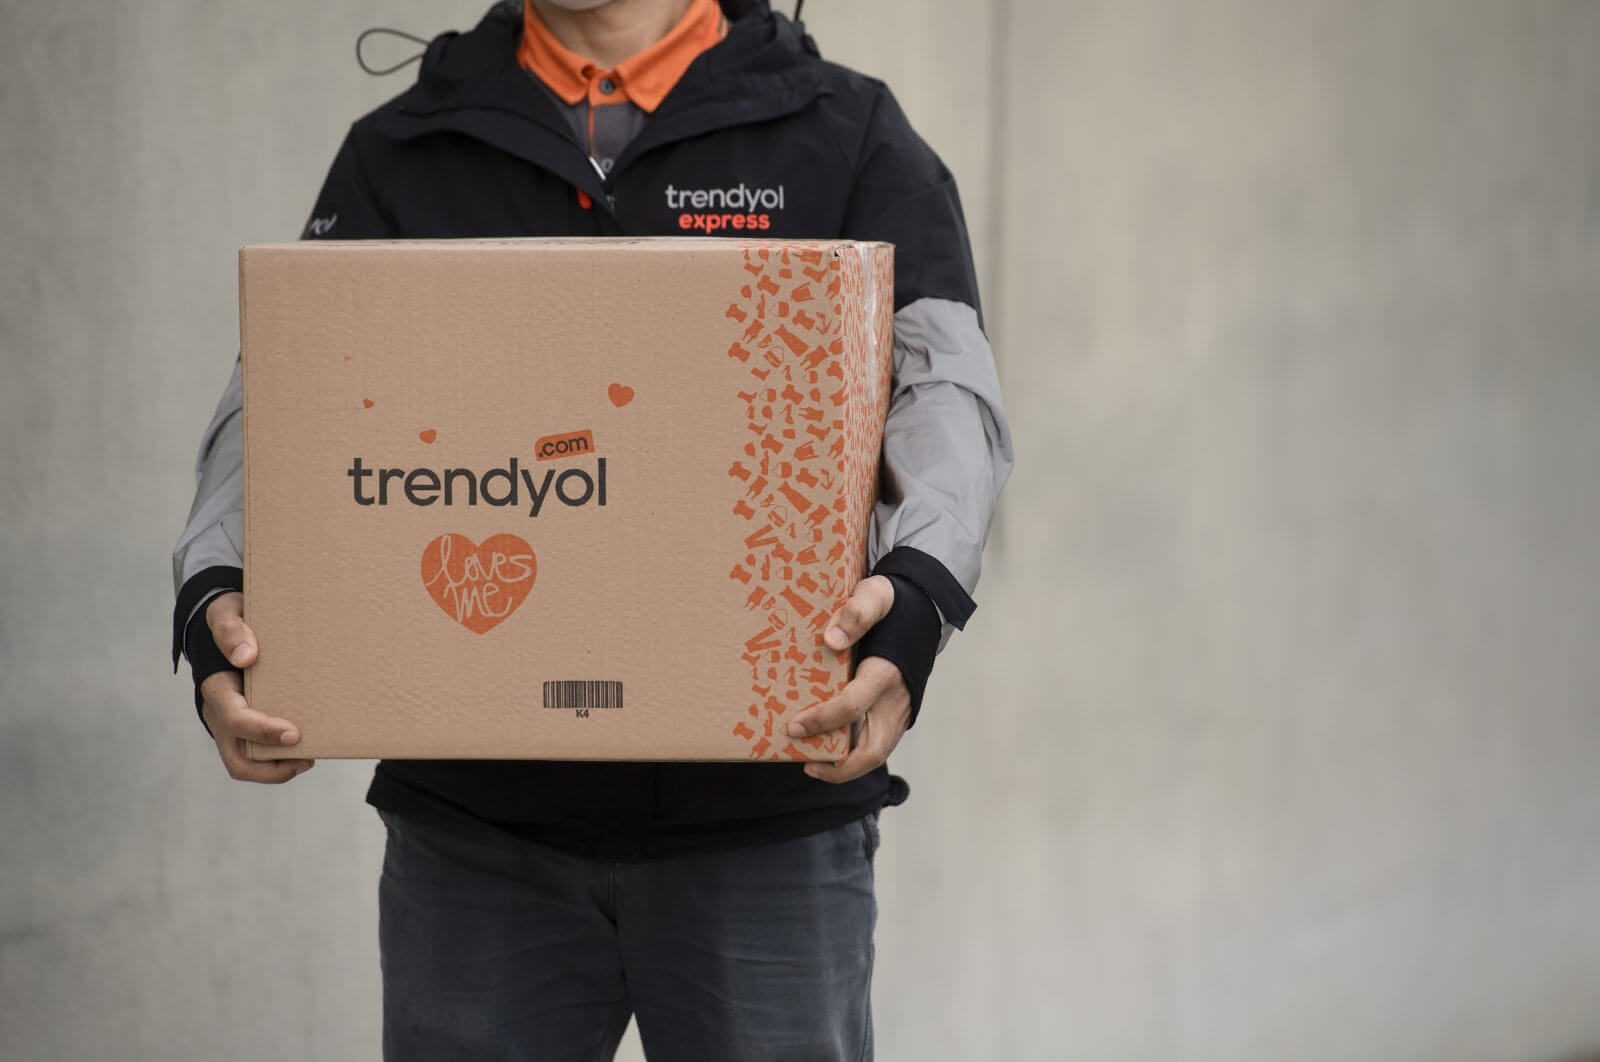 Leading live streaming provider partners with e-commerce giant Trendyol to launch in-app live shopping platform